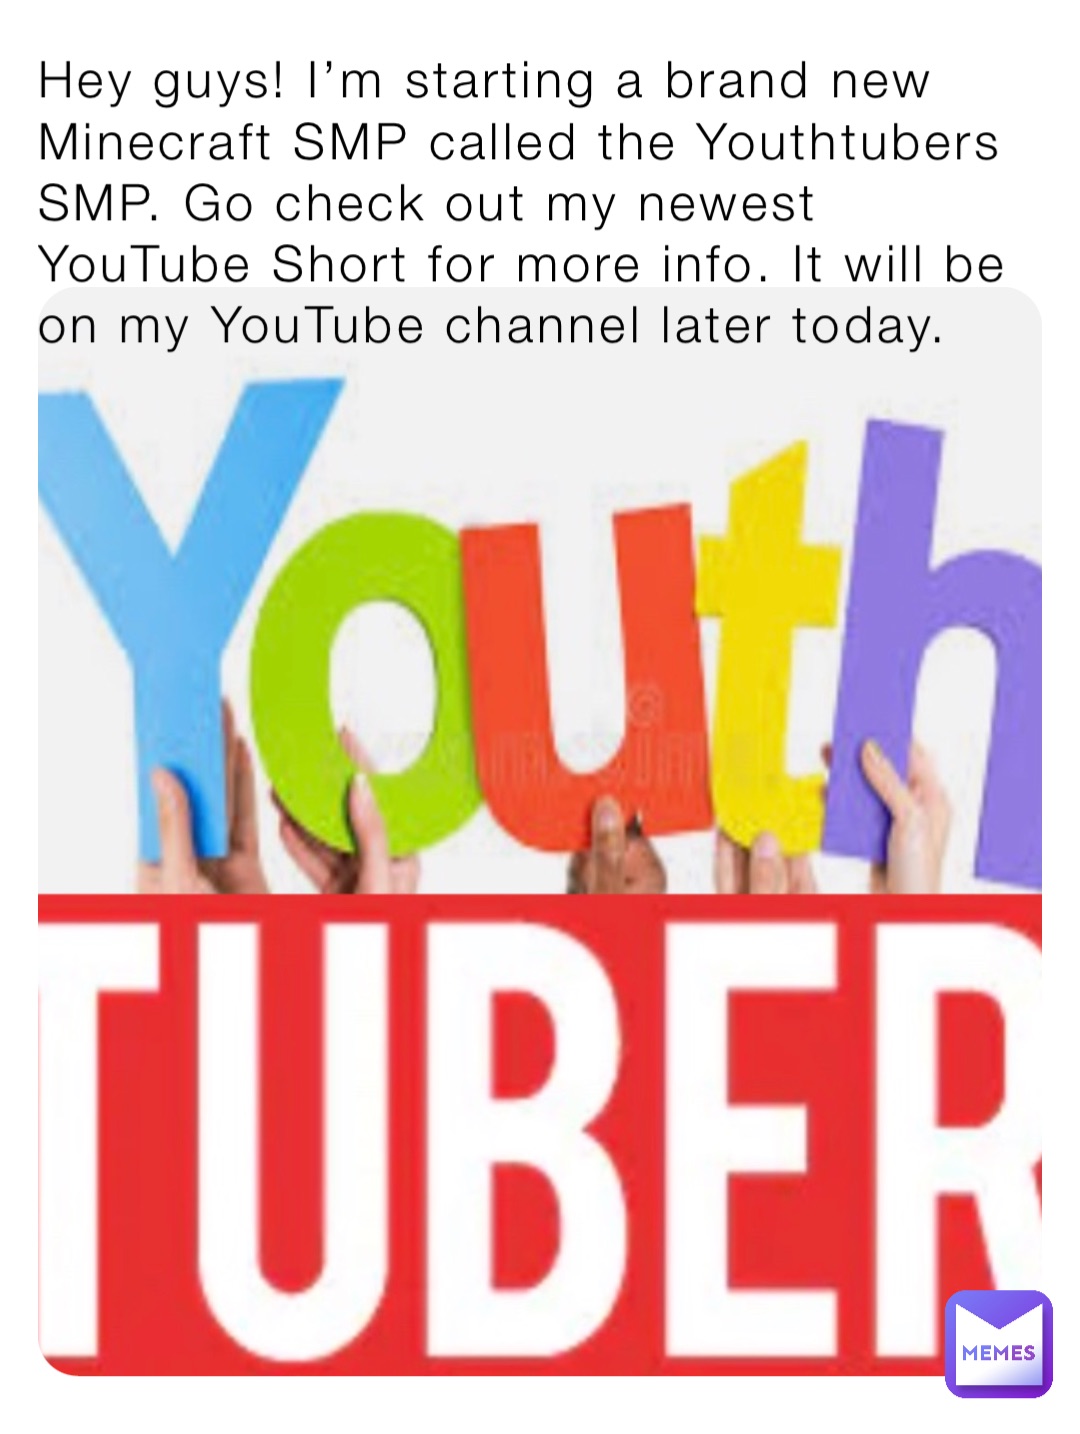 Hey guys! I’m starting a brand new Minecraft SMP called the Youthtubers SMP. Go check out my newest YouTube Short for more info. It will be on my YouTube channel later today.